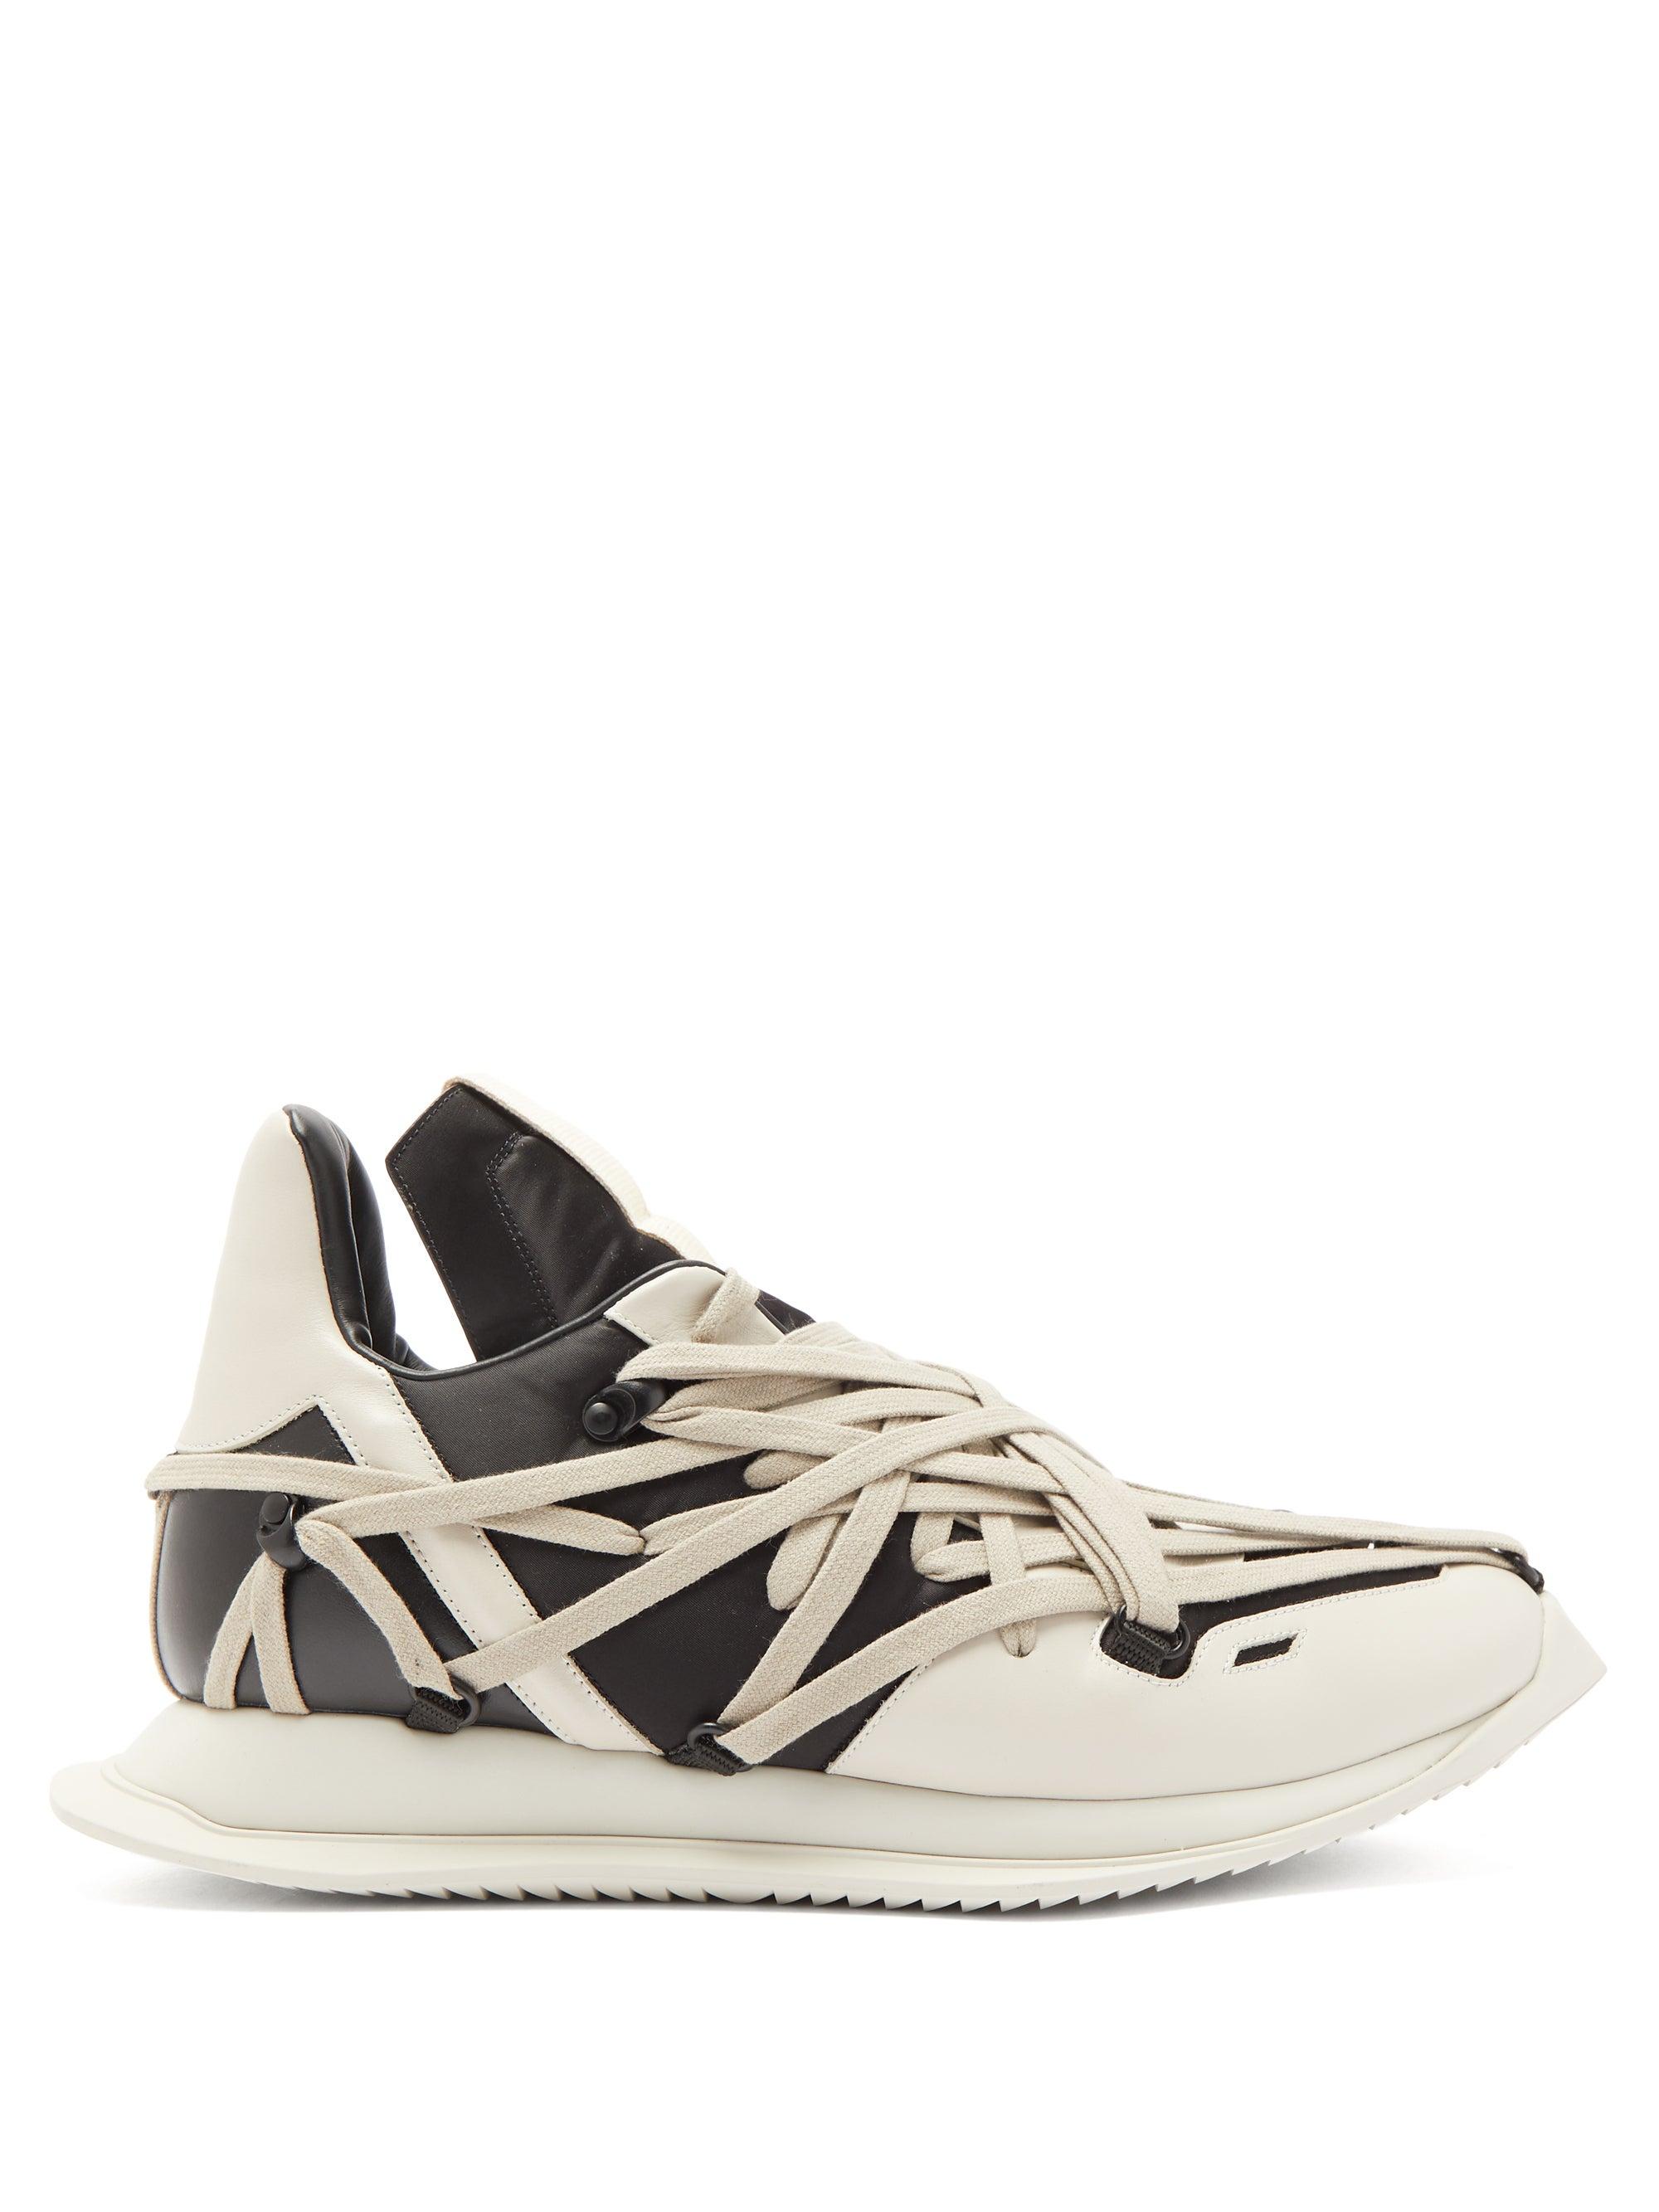 Rick Owens Maximal Runner Laced Leather Trainers for Men | Lyst